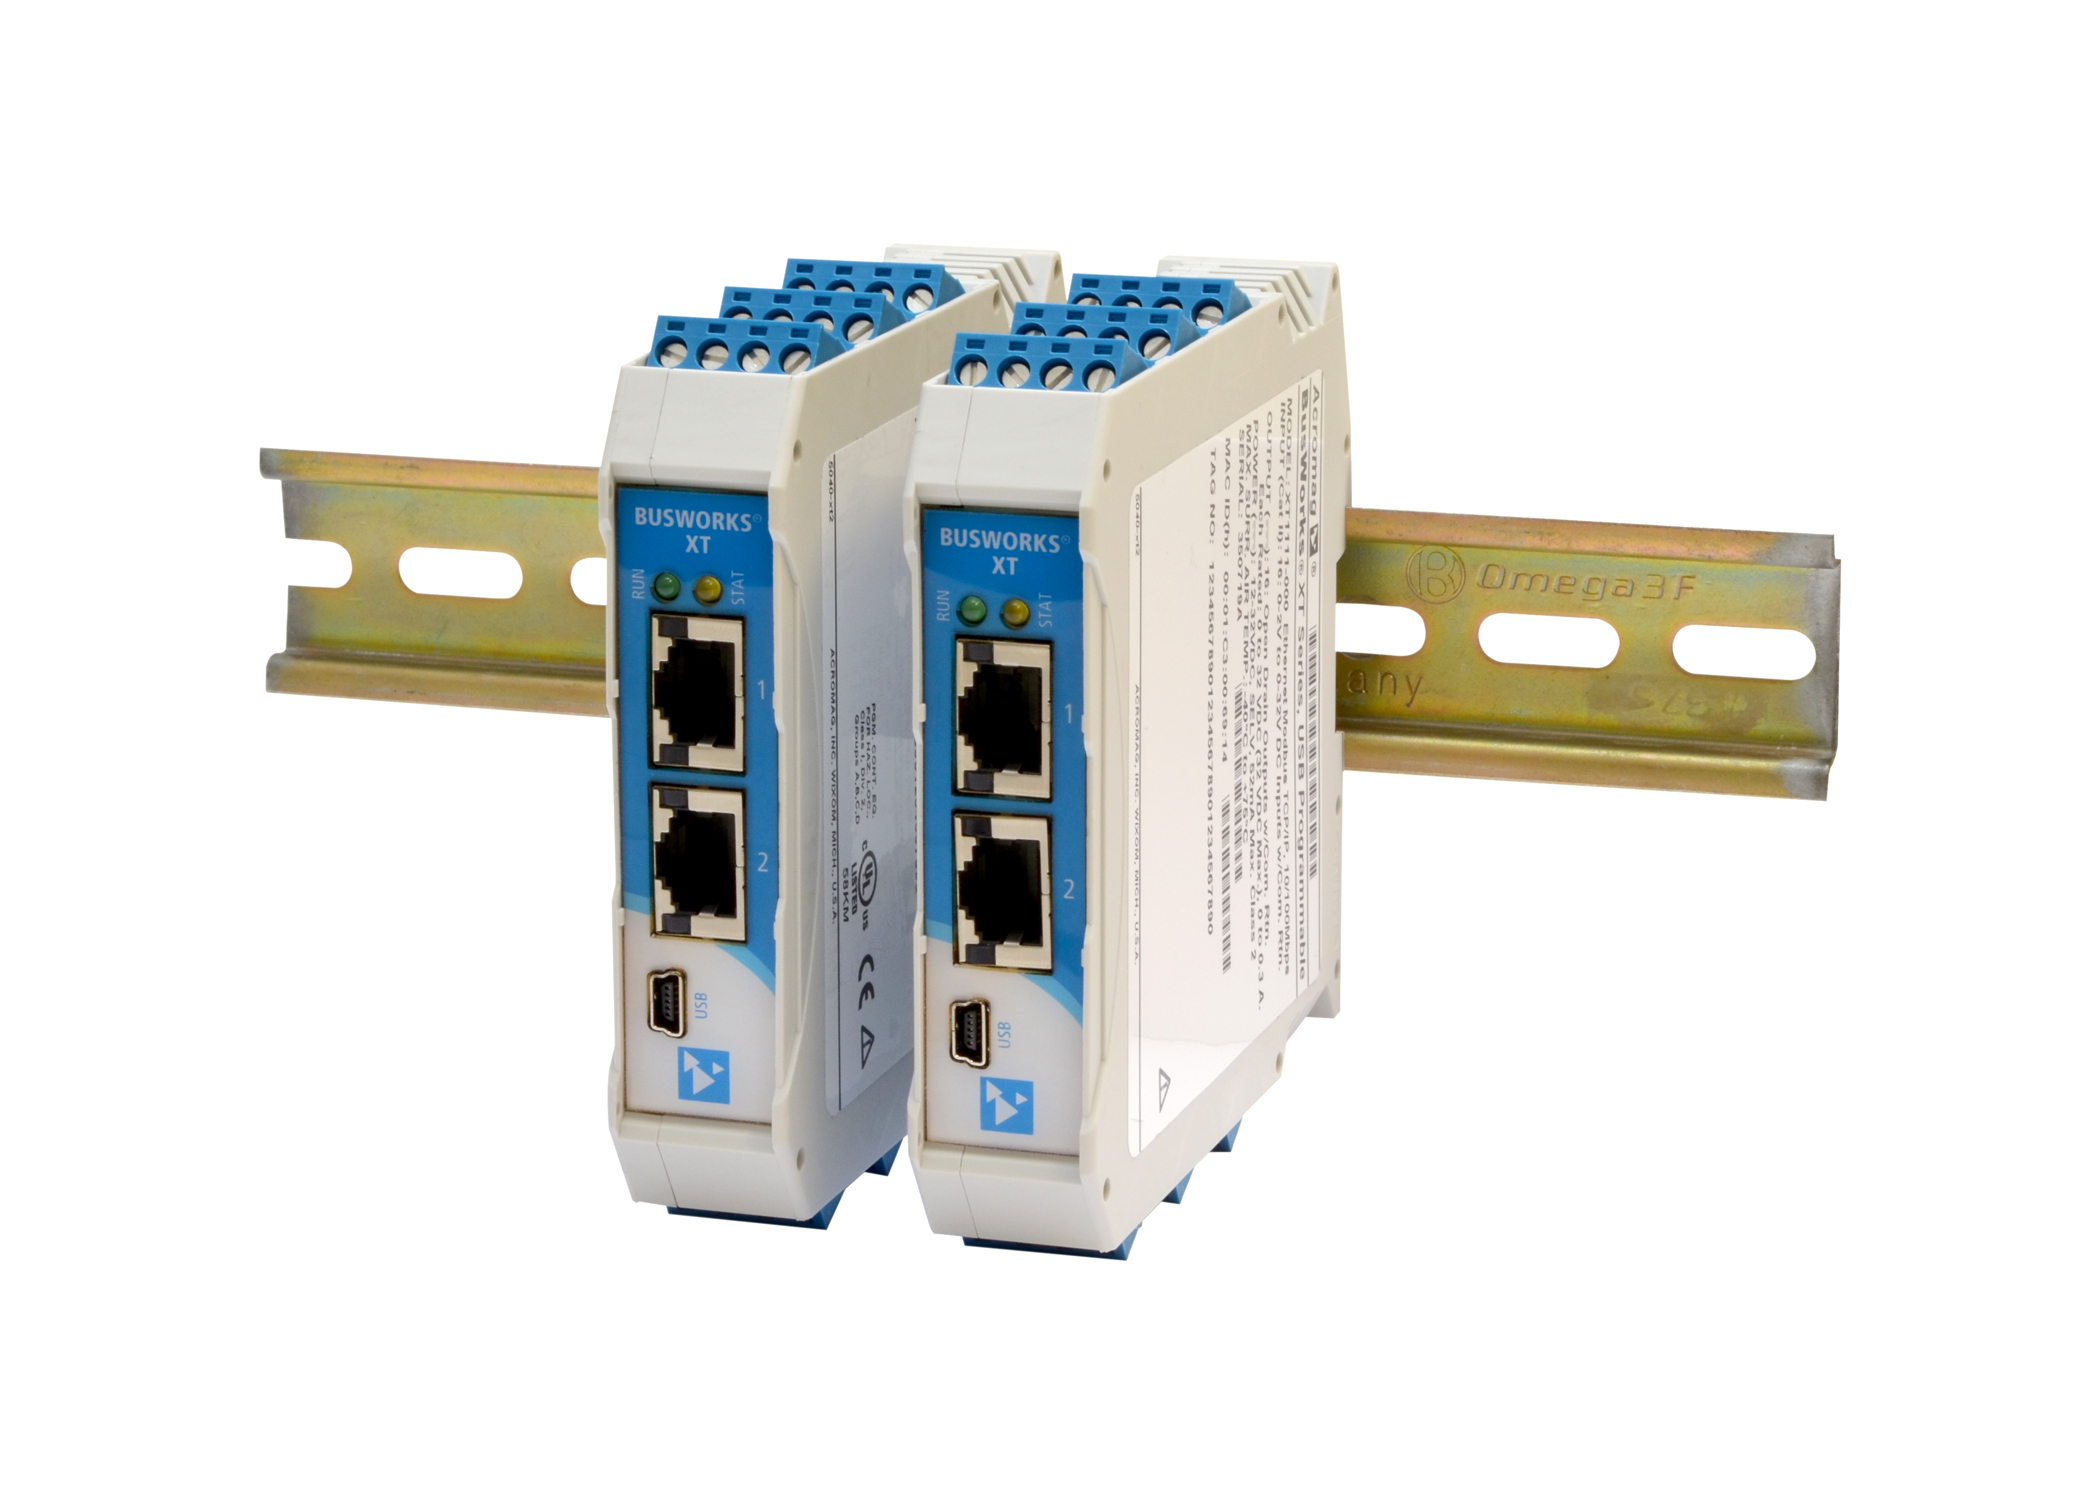 Acromag’s New 8-Channel Ethernet Modules Provide a Reliable Interface for Analog Current or Voltage Inputs